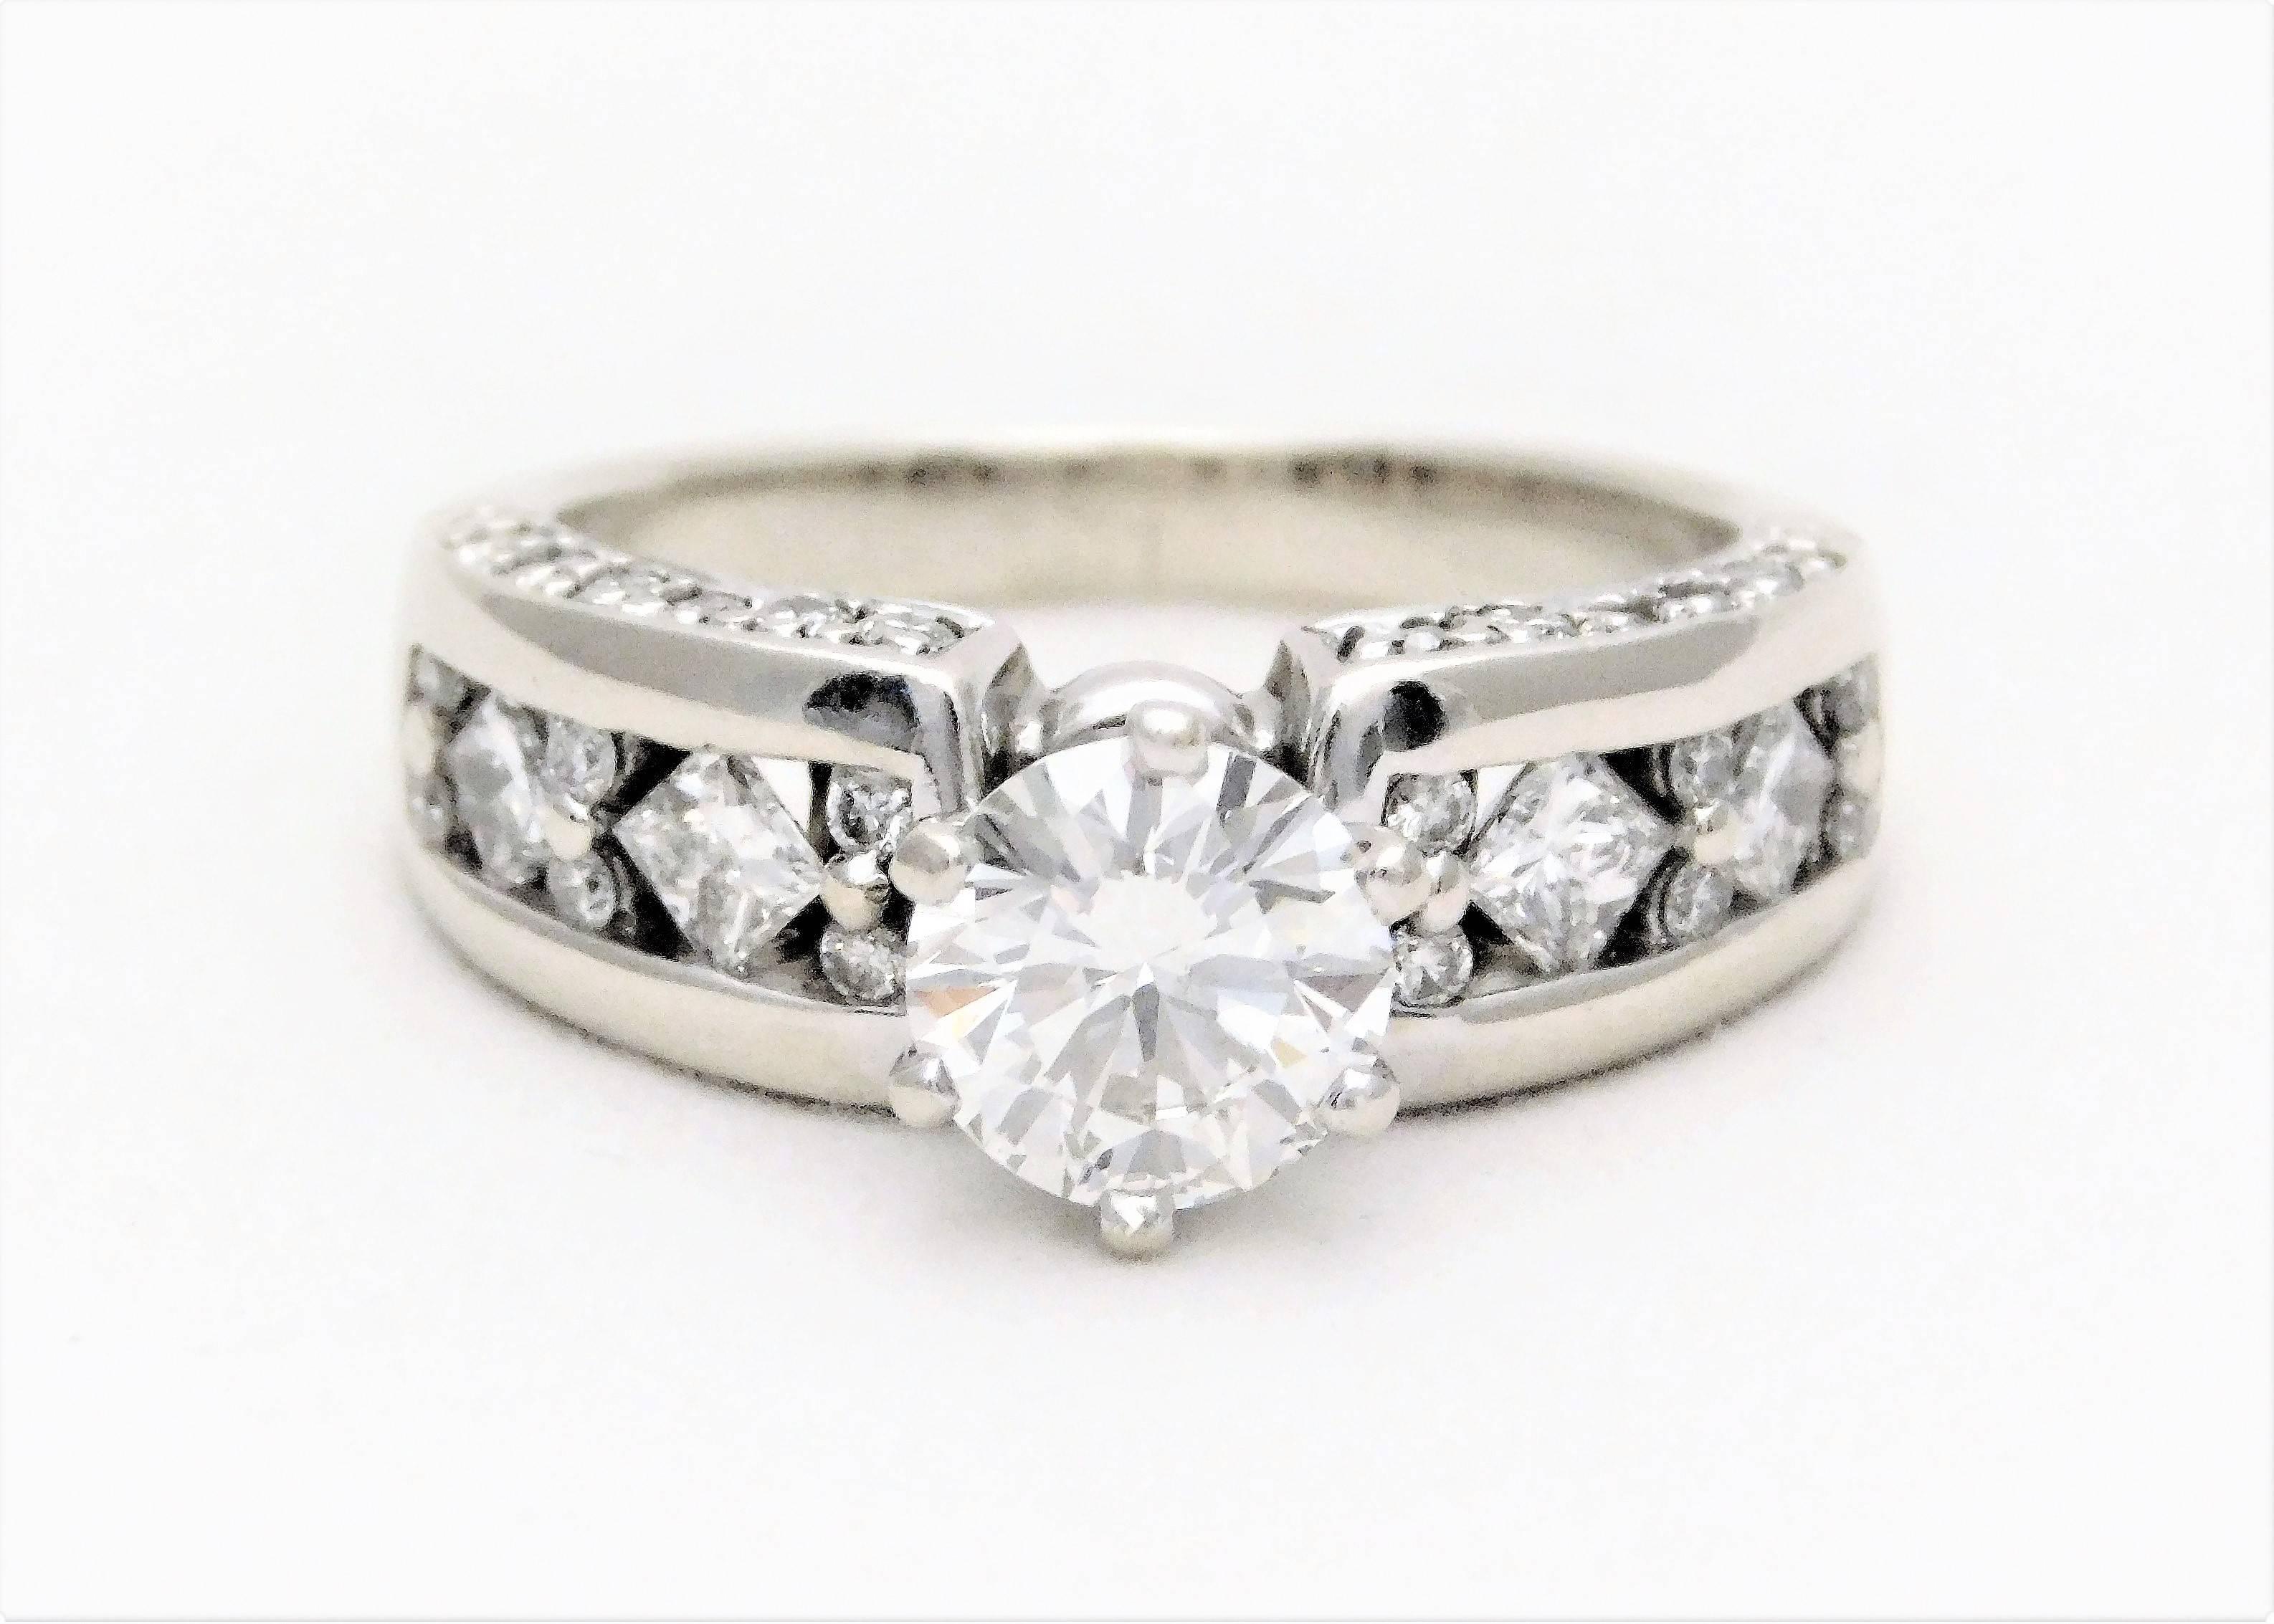 Circa 1990.  From a lovely Southern estate.  This vintage diamond engagement ring has been crafted in 14k white gold.  Completely restored to it’s original “like new” condition.  It has been masterfully jeweled with an extremely luminous, GIA